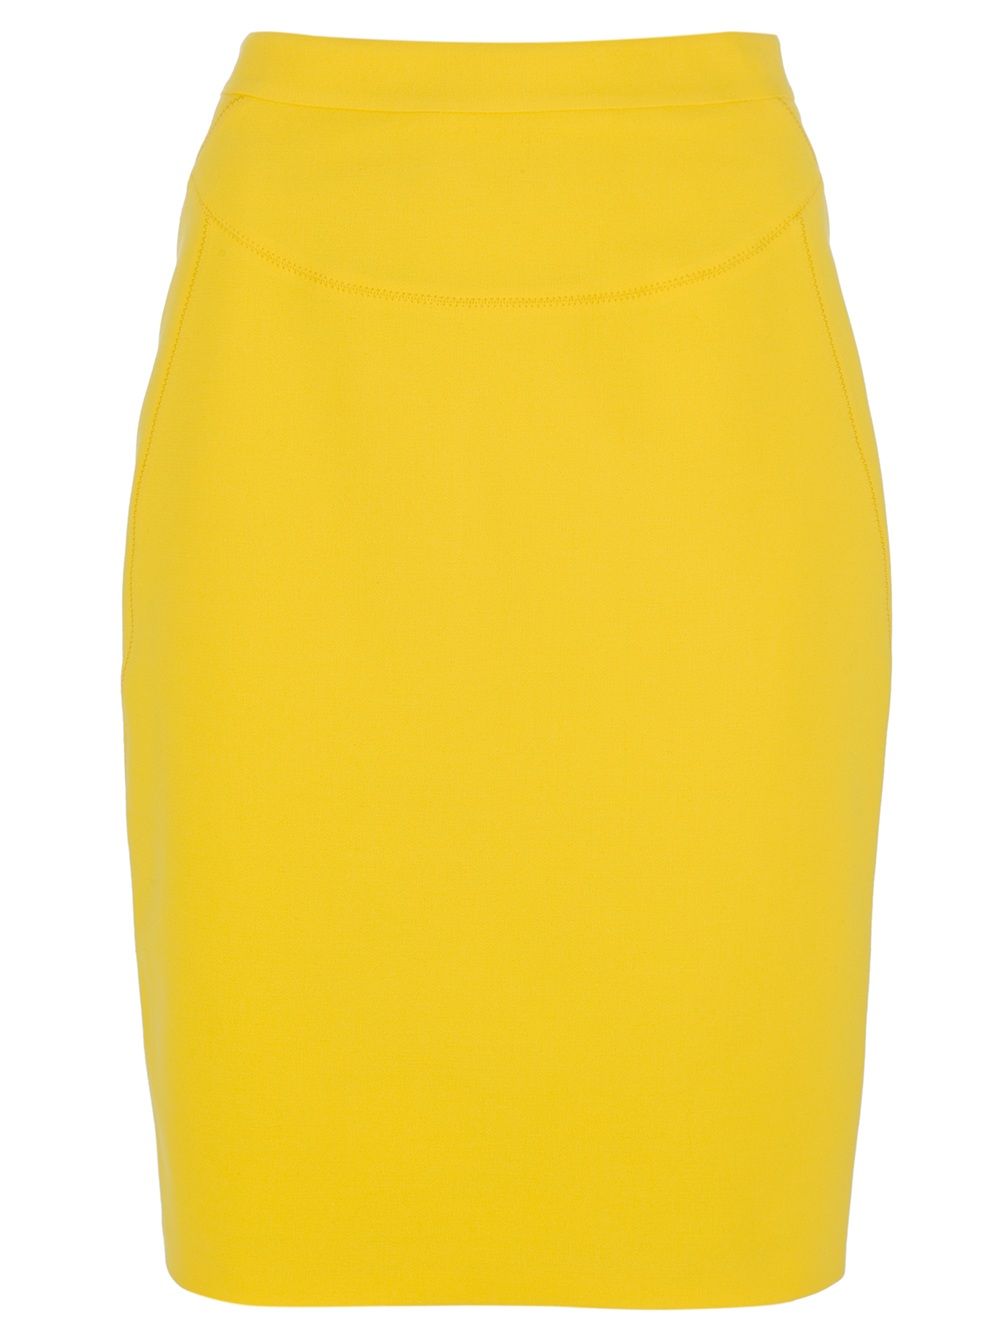 Dsquared2 Dart Pencil Skirt in Yellow | Lyst